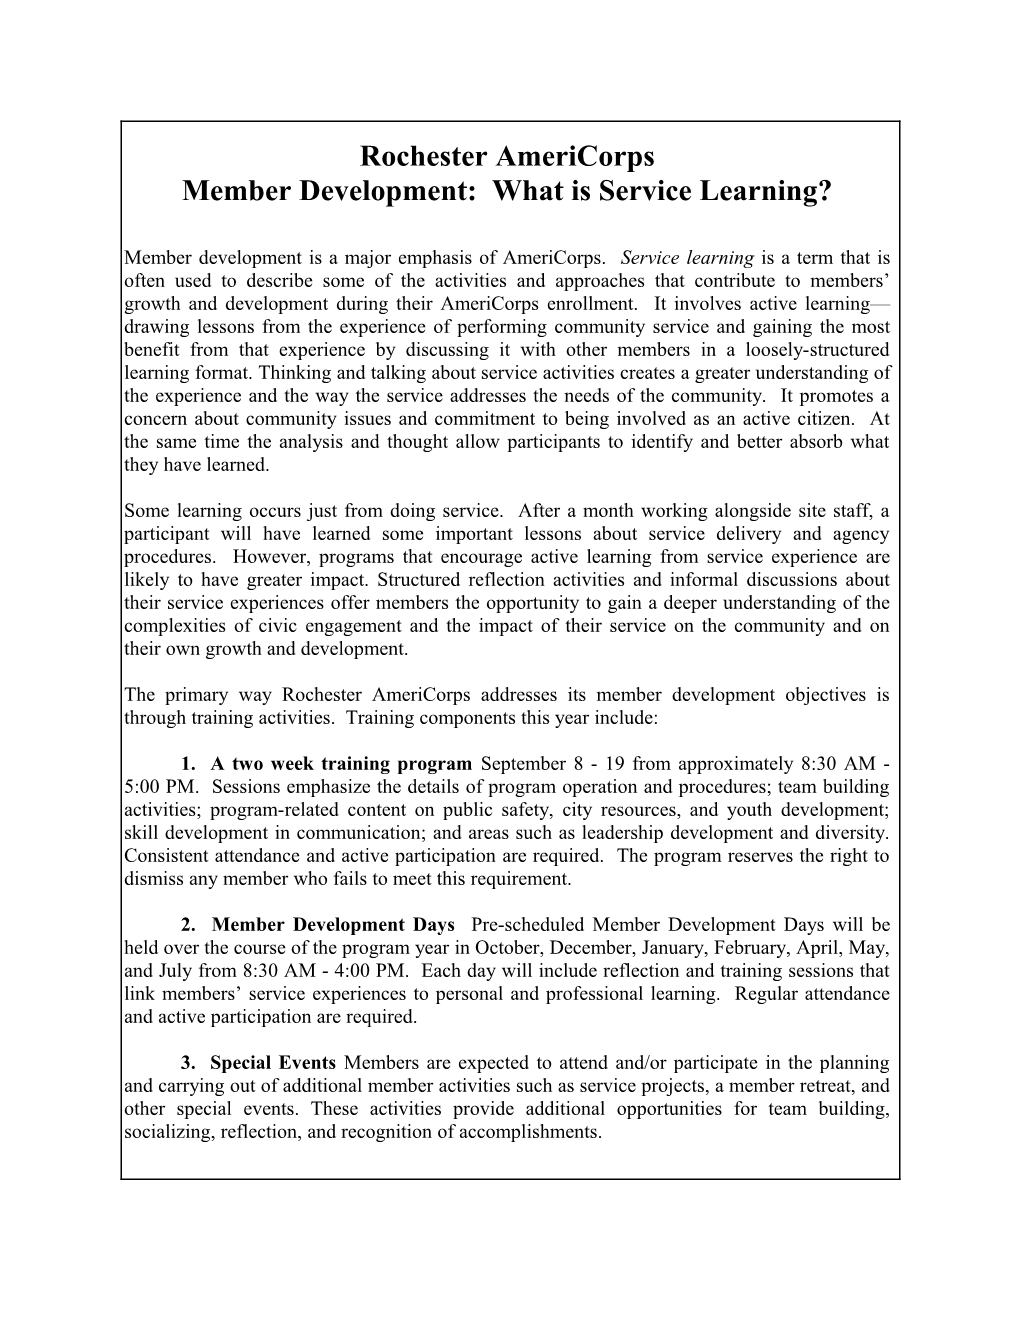 Member Development: What Is Service Learning?